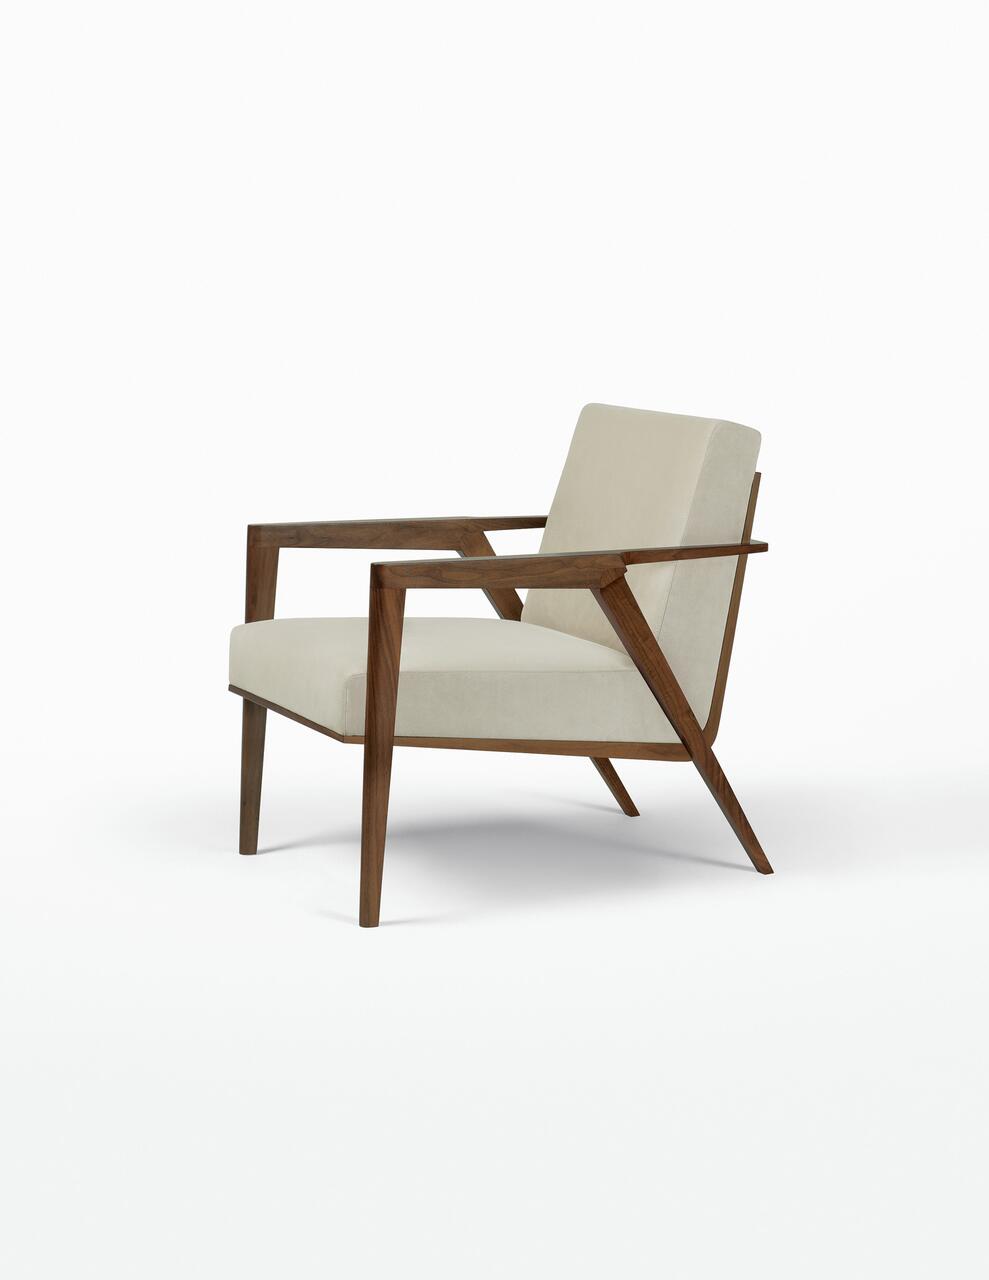 16C-175_Odense Chair - Upholstered lounge chair with a walnut frame_Holly Hunt